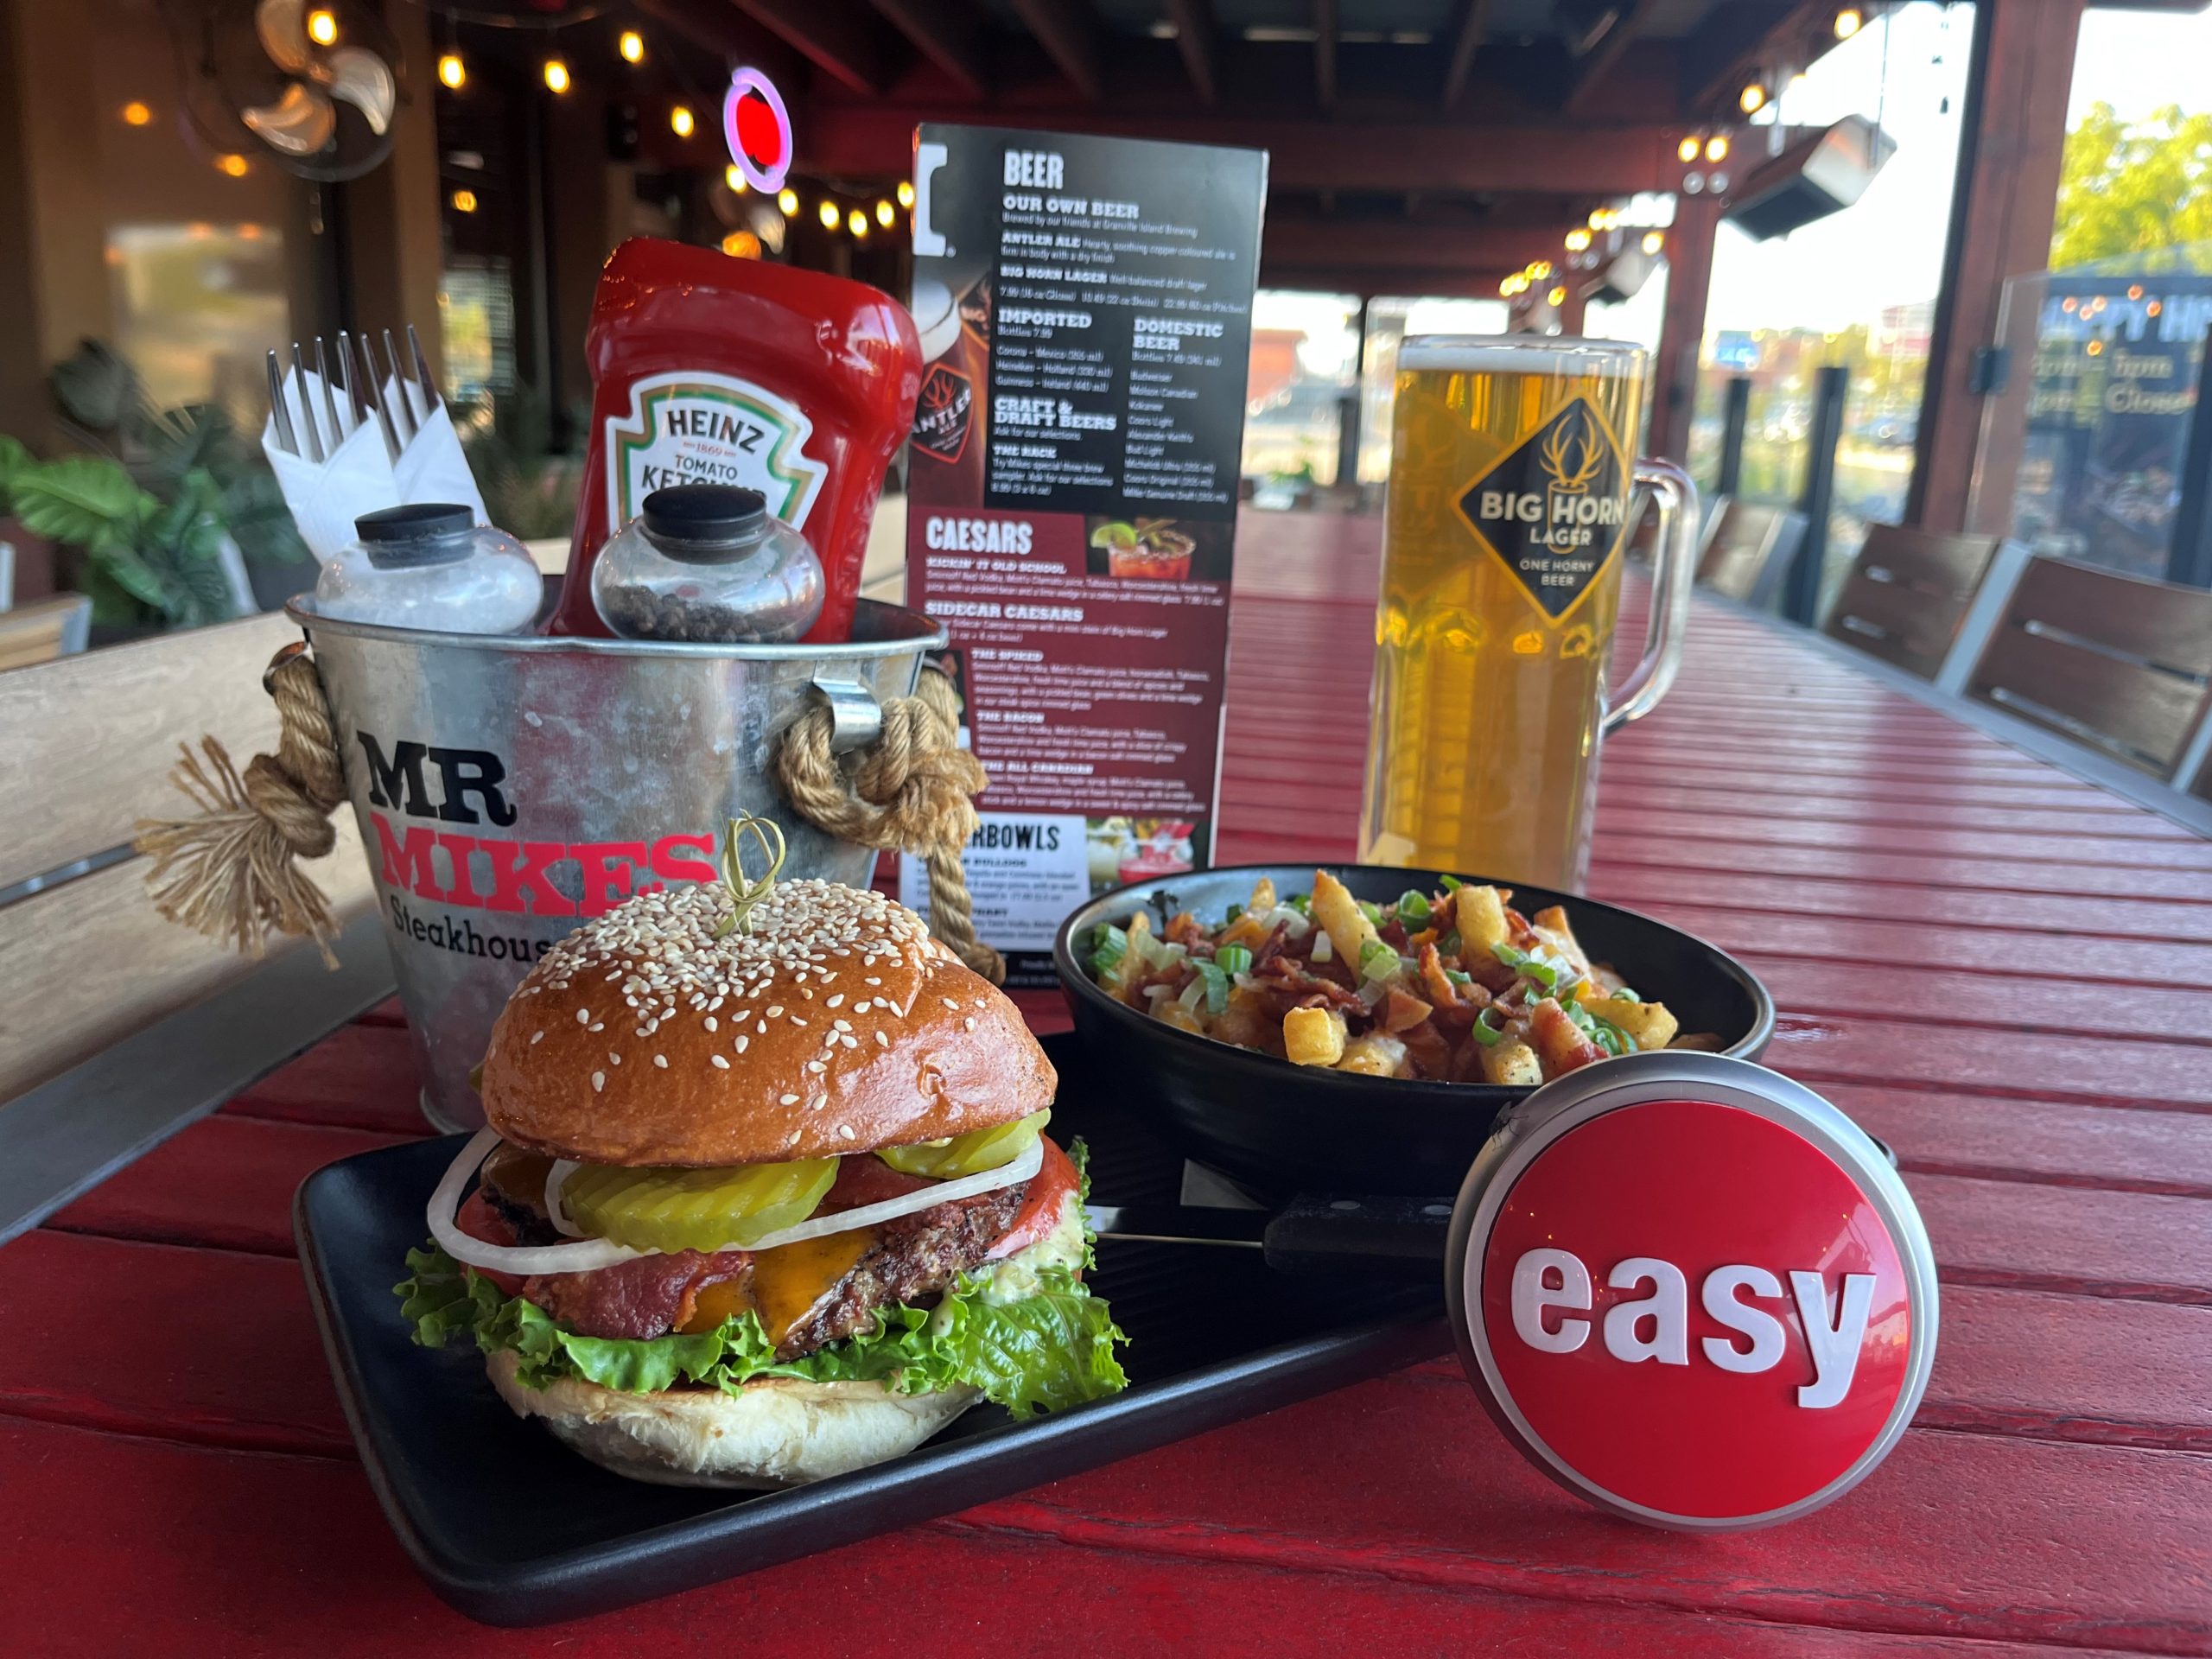 A burger on a black plate with fries on a red patio table. Next to the plate is a Staples "easy" button, some condiments, and a beer in a tall glass